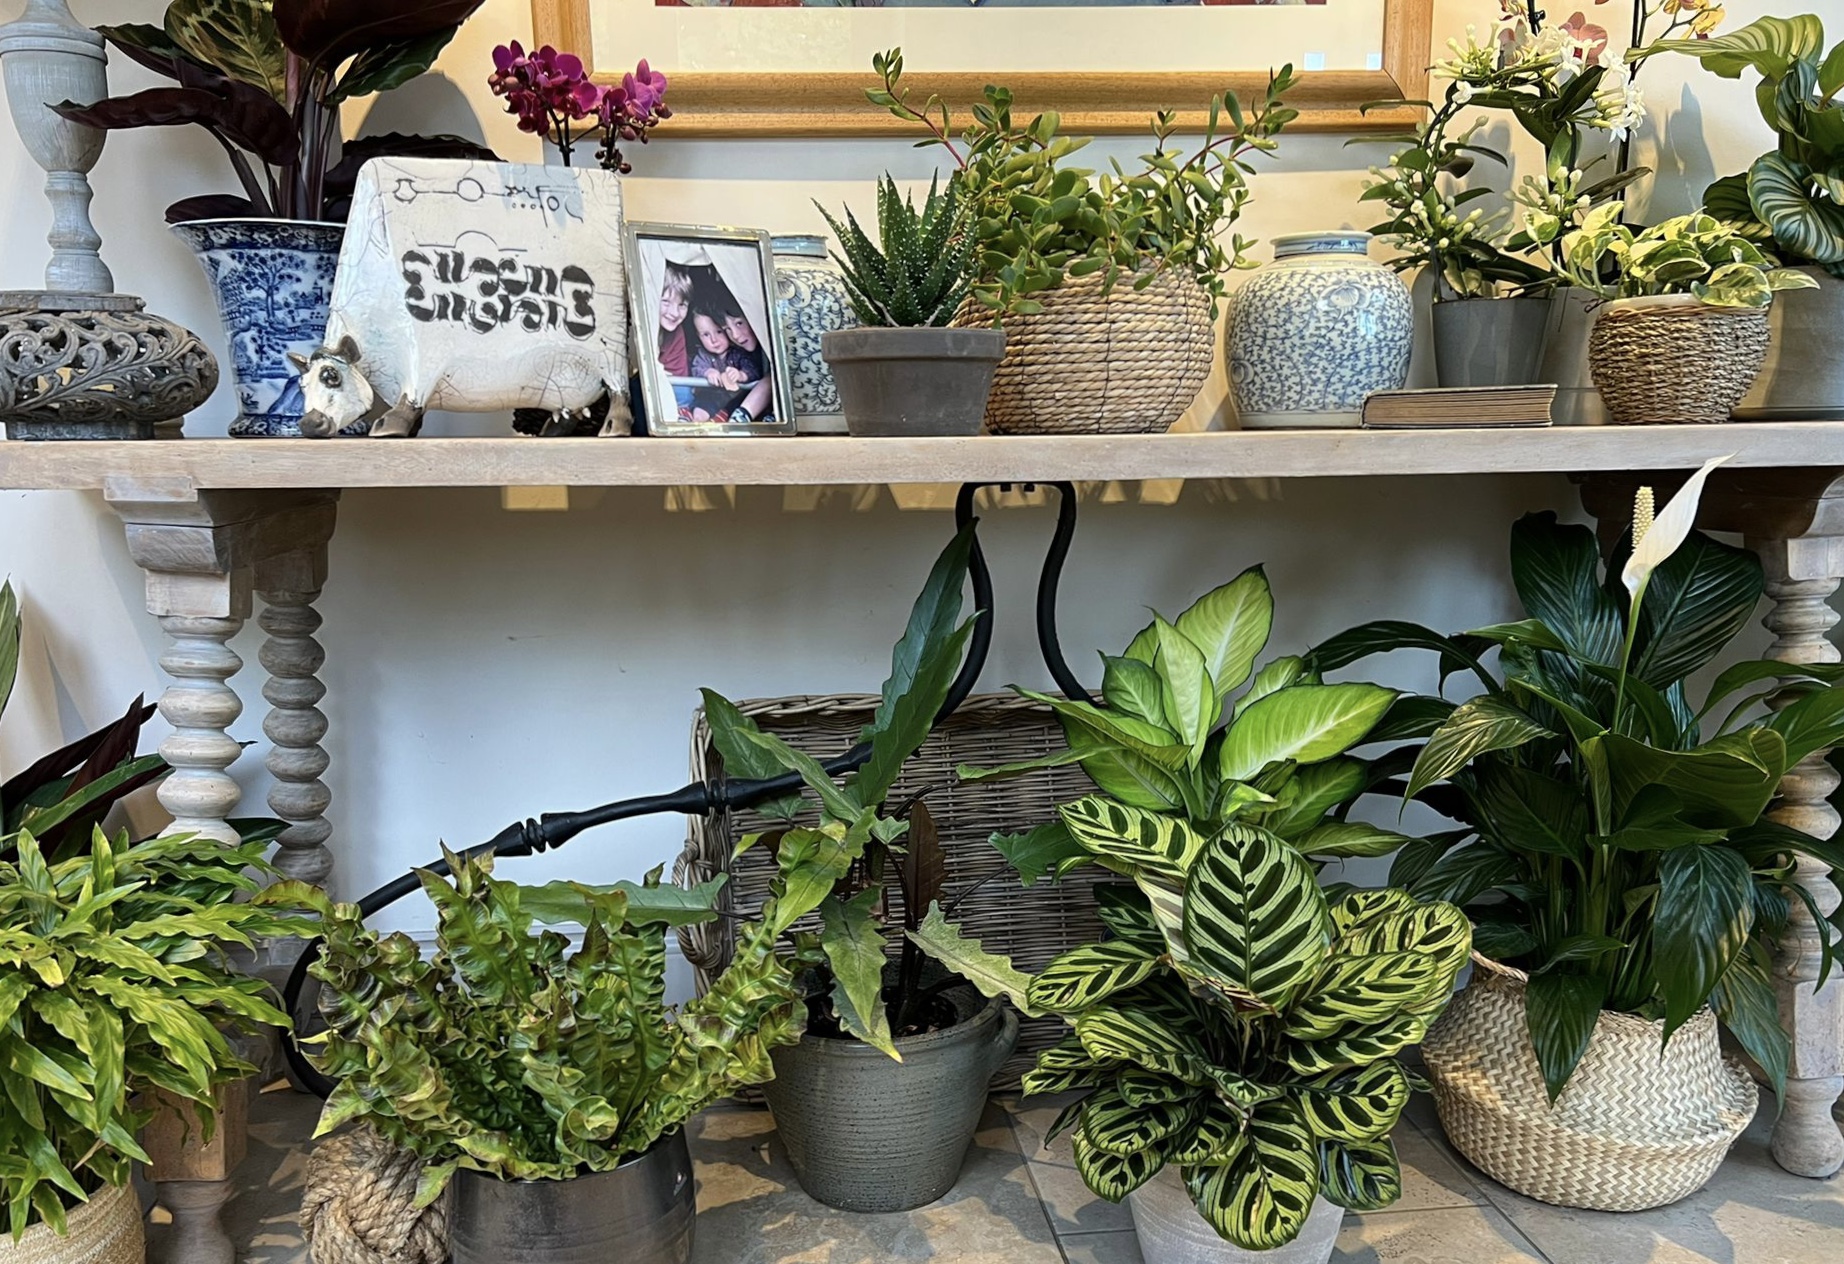 Palmers Garden Centre - Enderby & Ullesthorpe, Leicestershire’s Best Garden Centre - Houseplant display